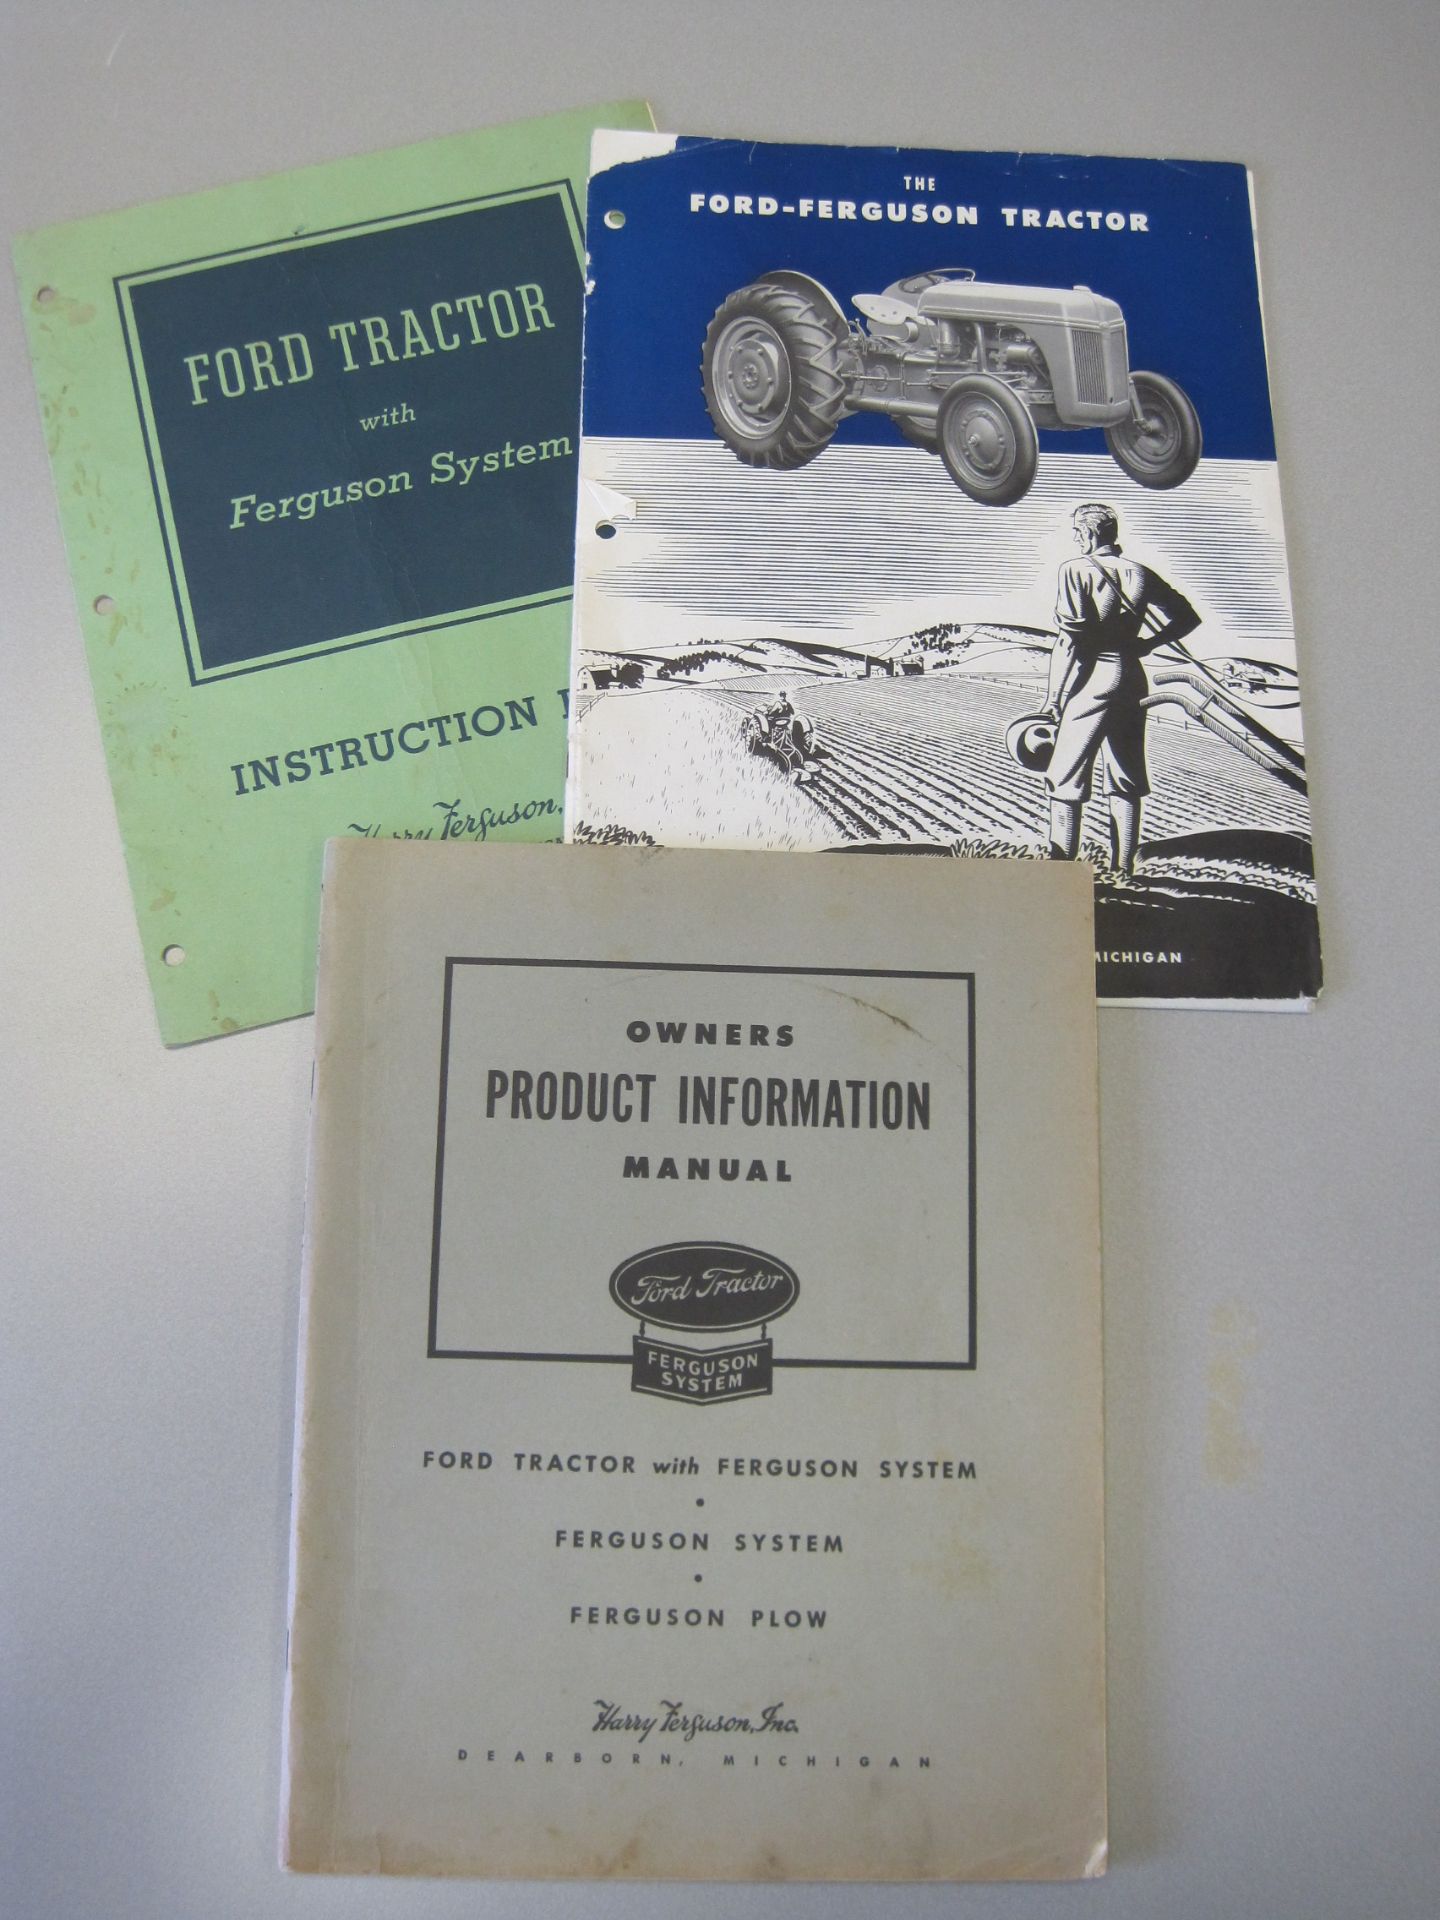 Ford Tractor with Ferguson System Instruction Book, Product Information Manual and 23pp brochure (